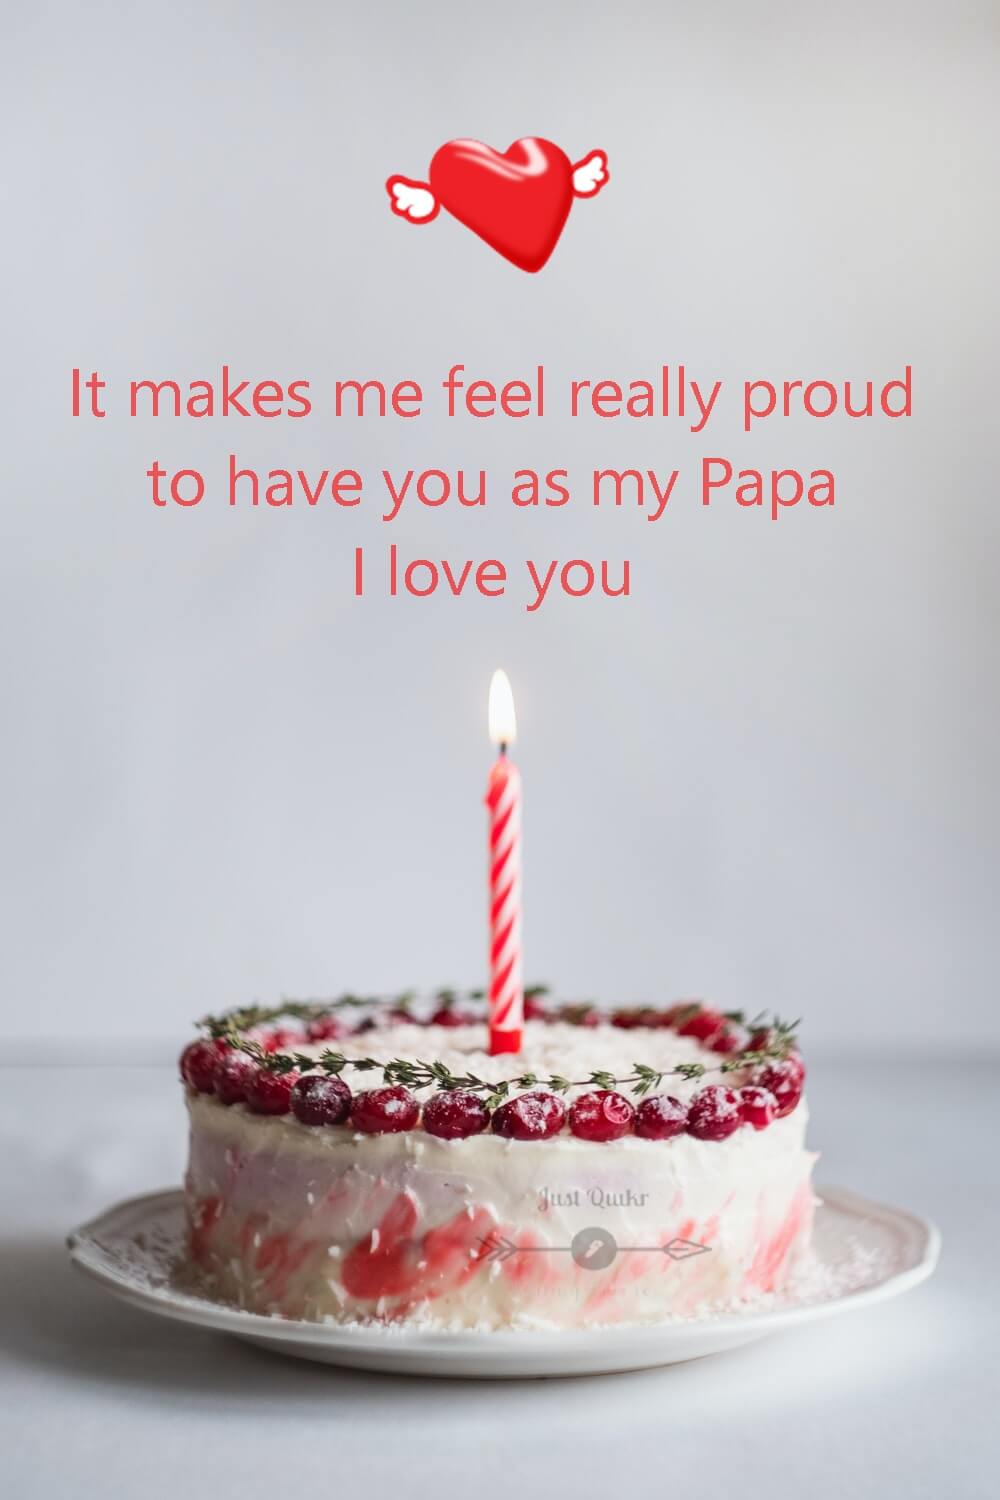 Special Unique Happy Birthday Cake HD Pics Image for Papa. Just Quikr presents birthday wishes, festival